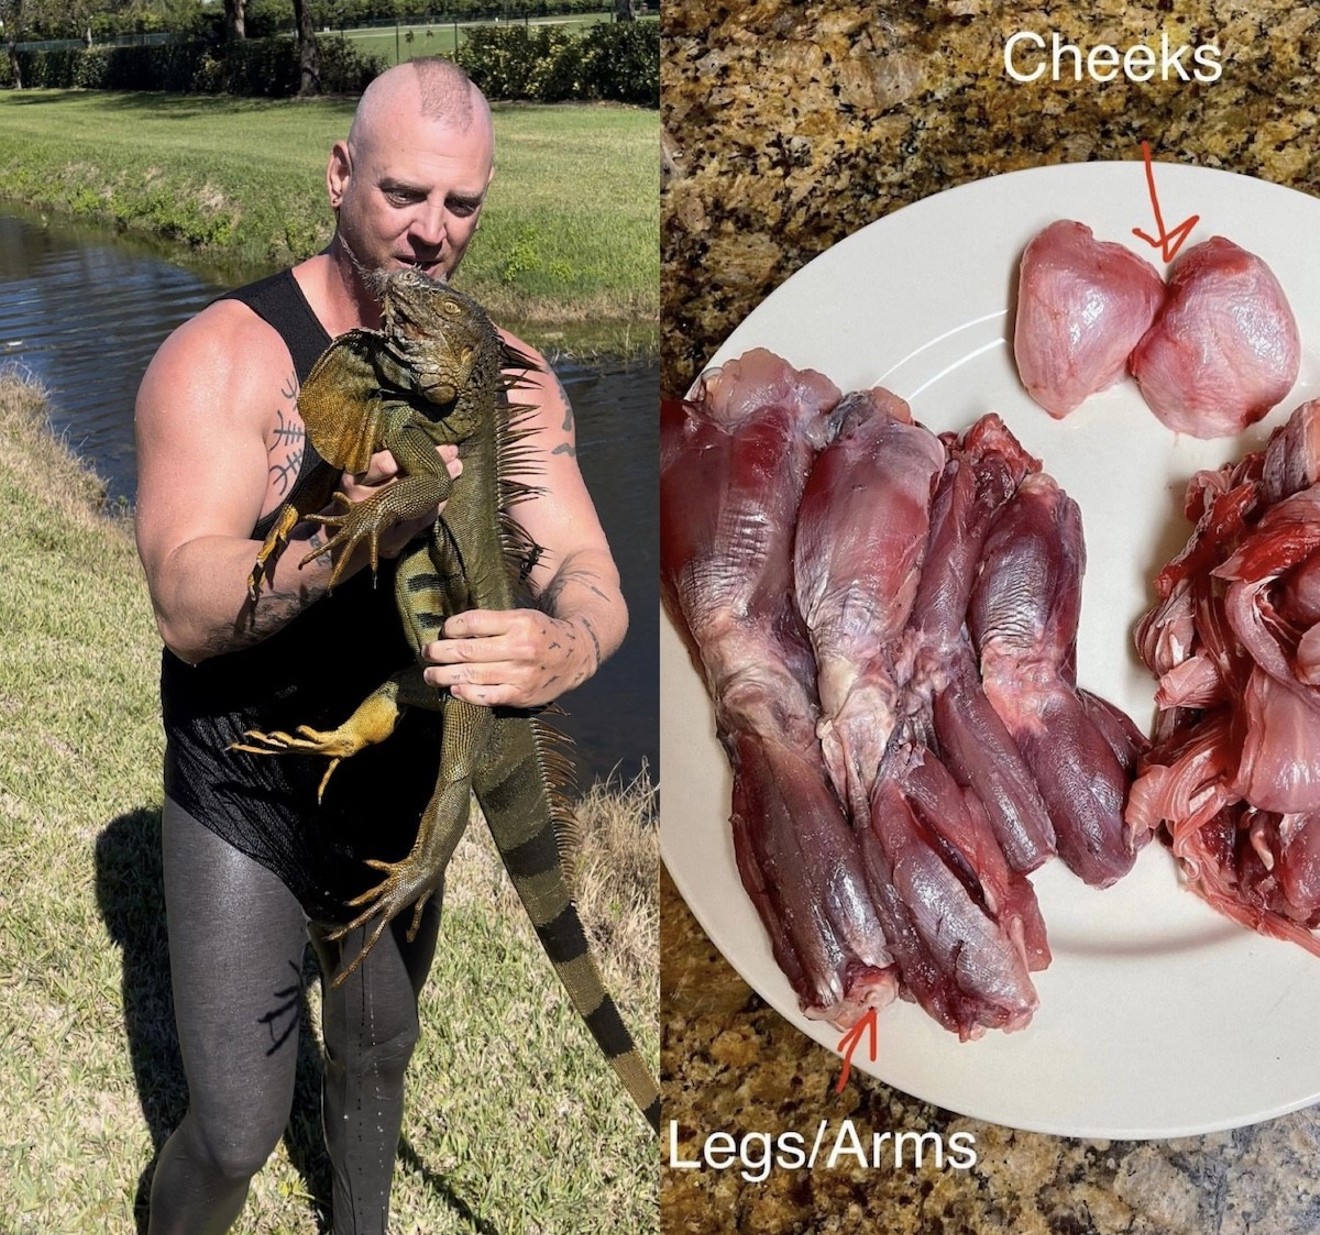 During the recent cold snap, South Florida native Ryan Ausburn caught more than a dozen iguanas to cook up in various preparations.